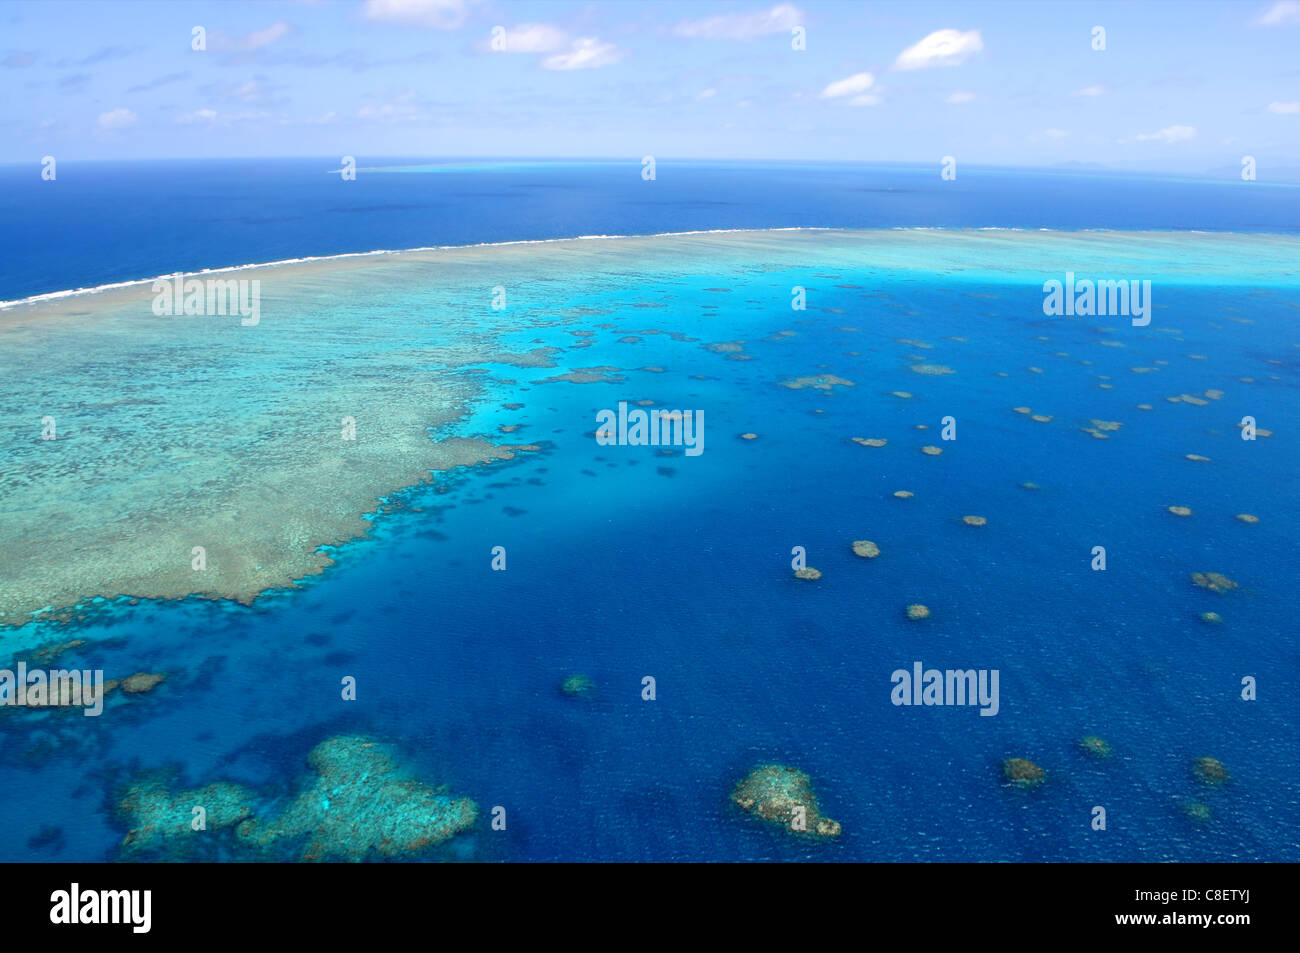 Great Barrier Reef, Cairns Australia seen from above Stock Photo